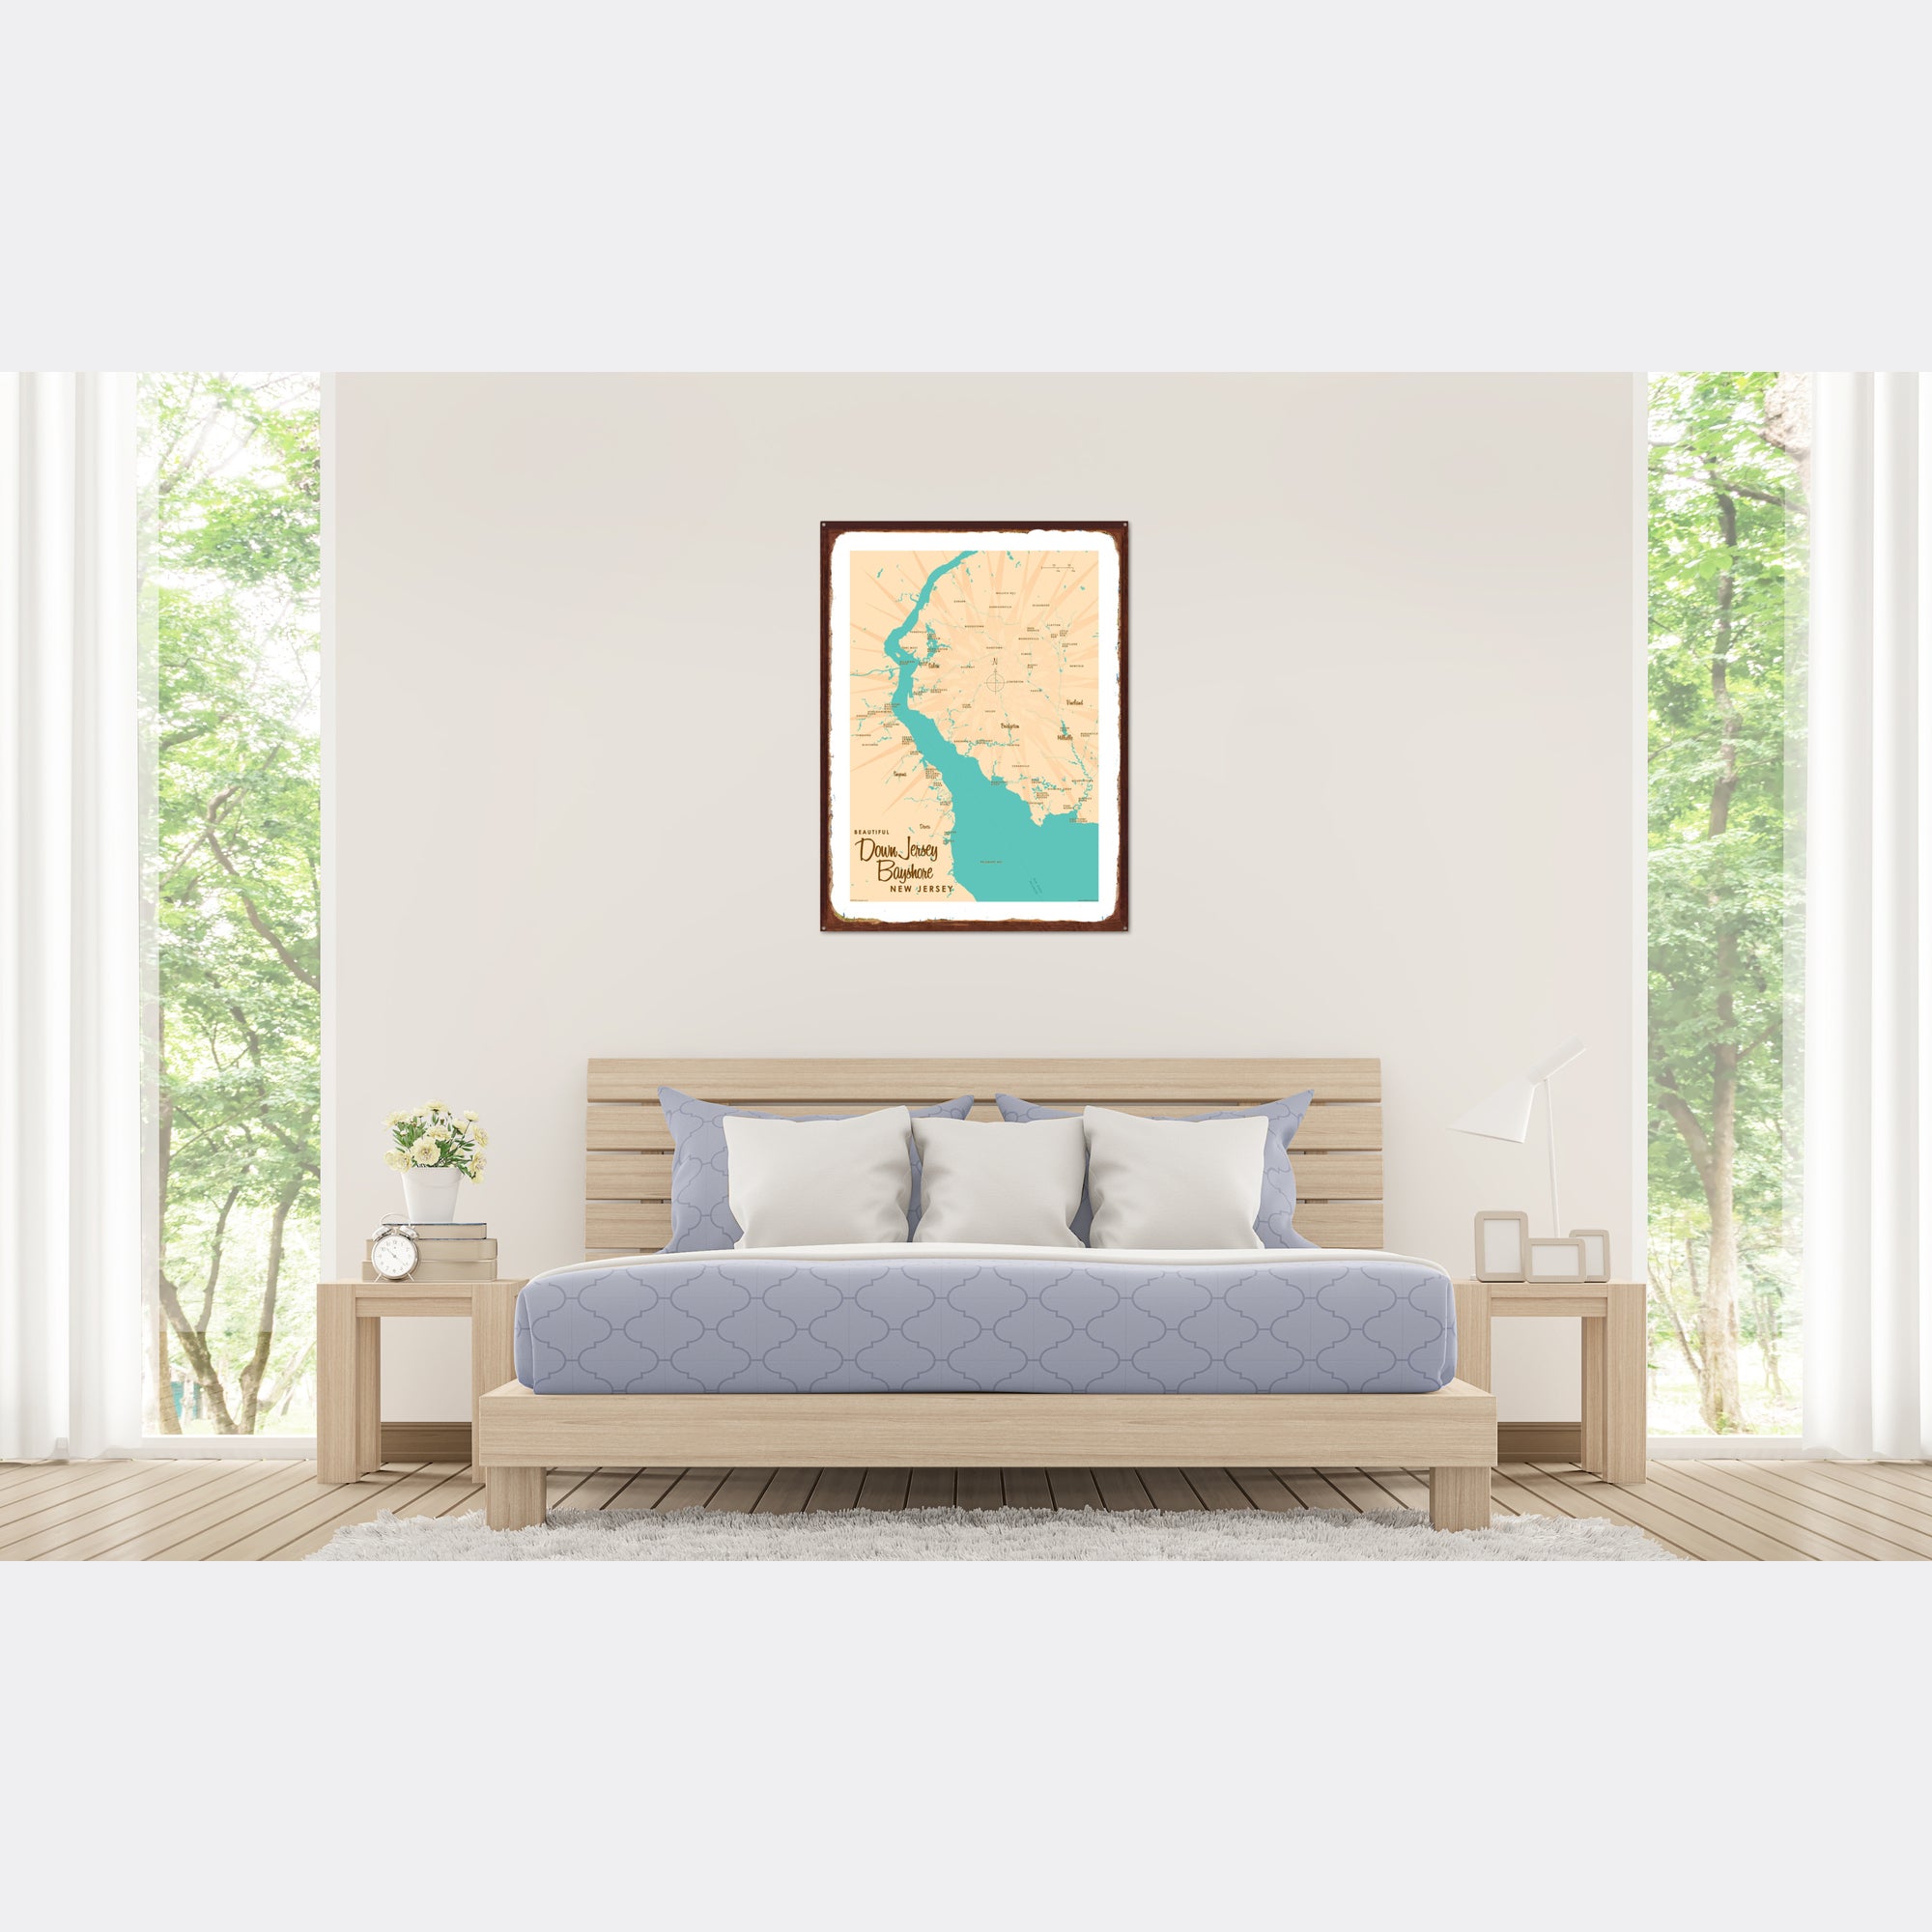 Down Jersey Bayshore New Jersey, Rustic Metal Sign Map Art